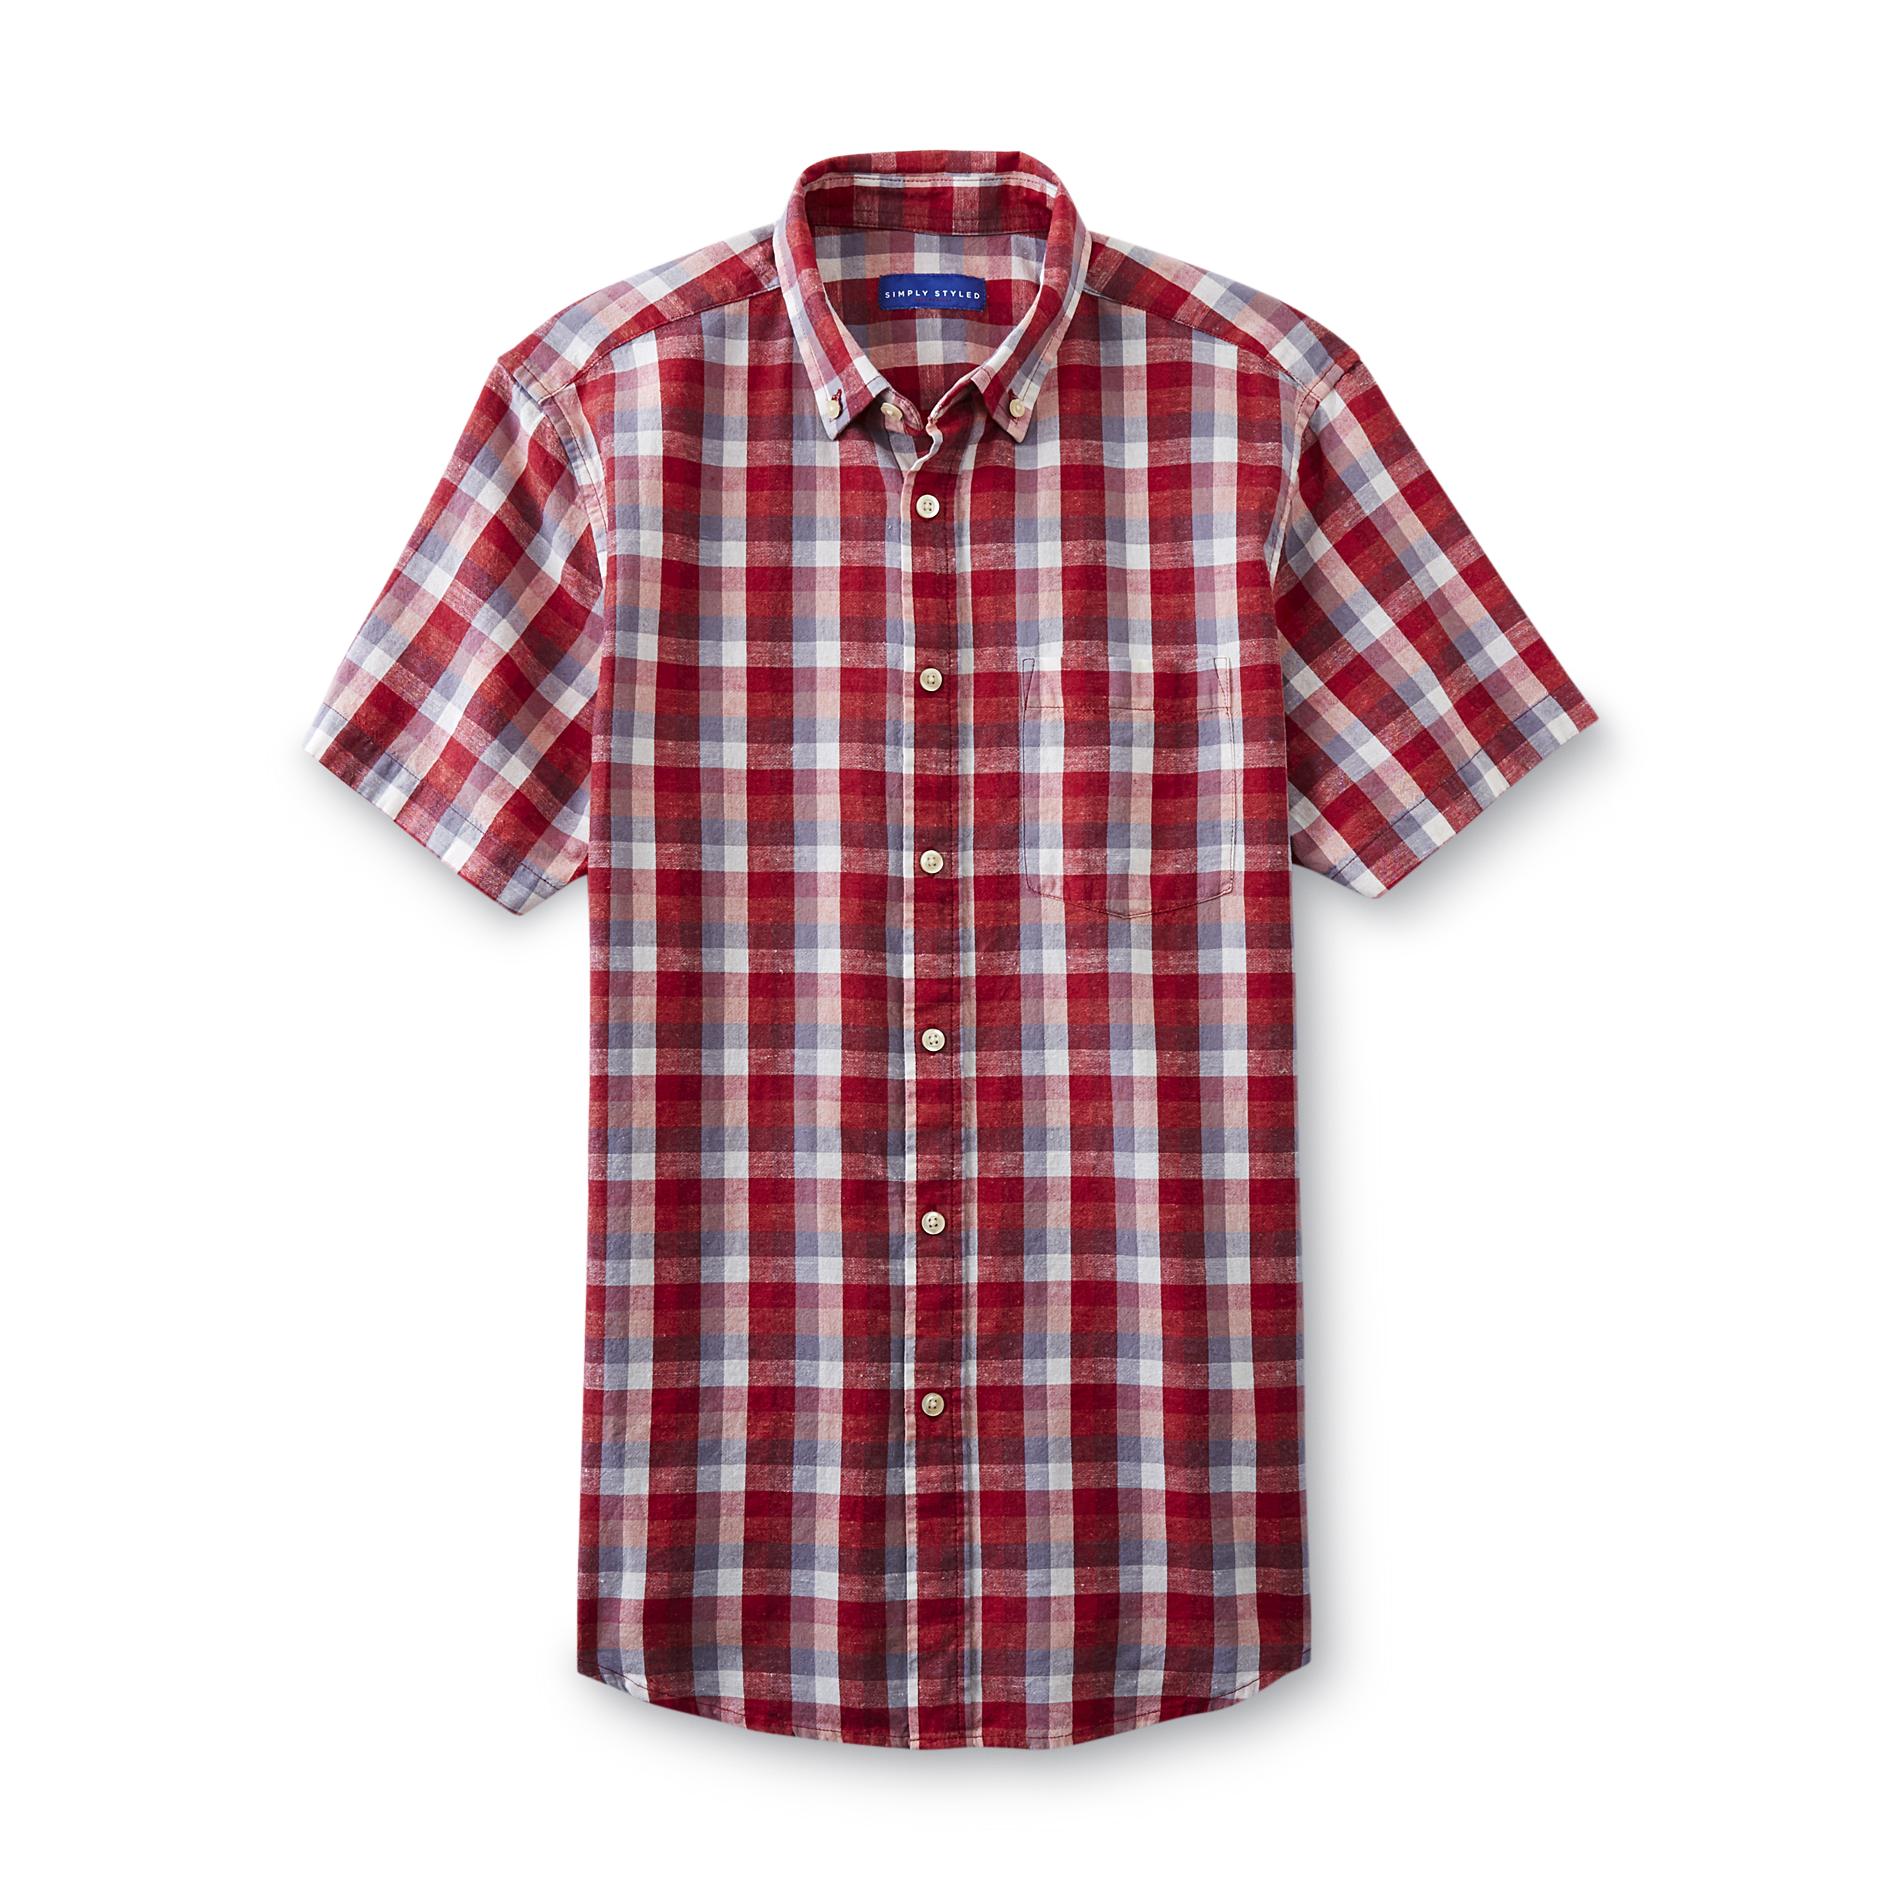 Simply Styled Men's Short-Sleeve Shirt - Red Plaid